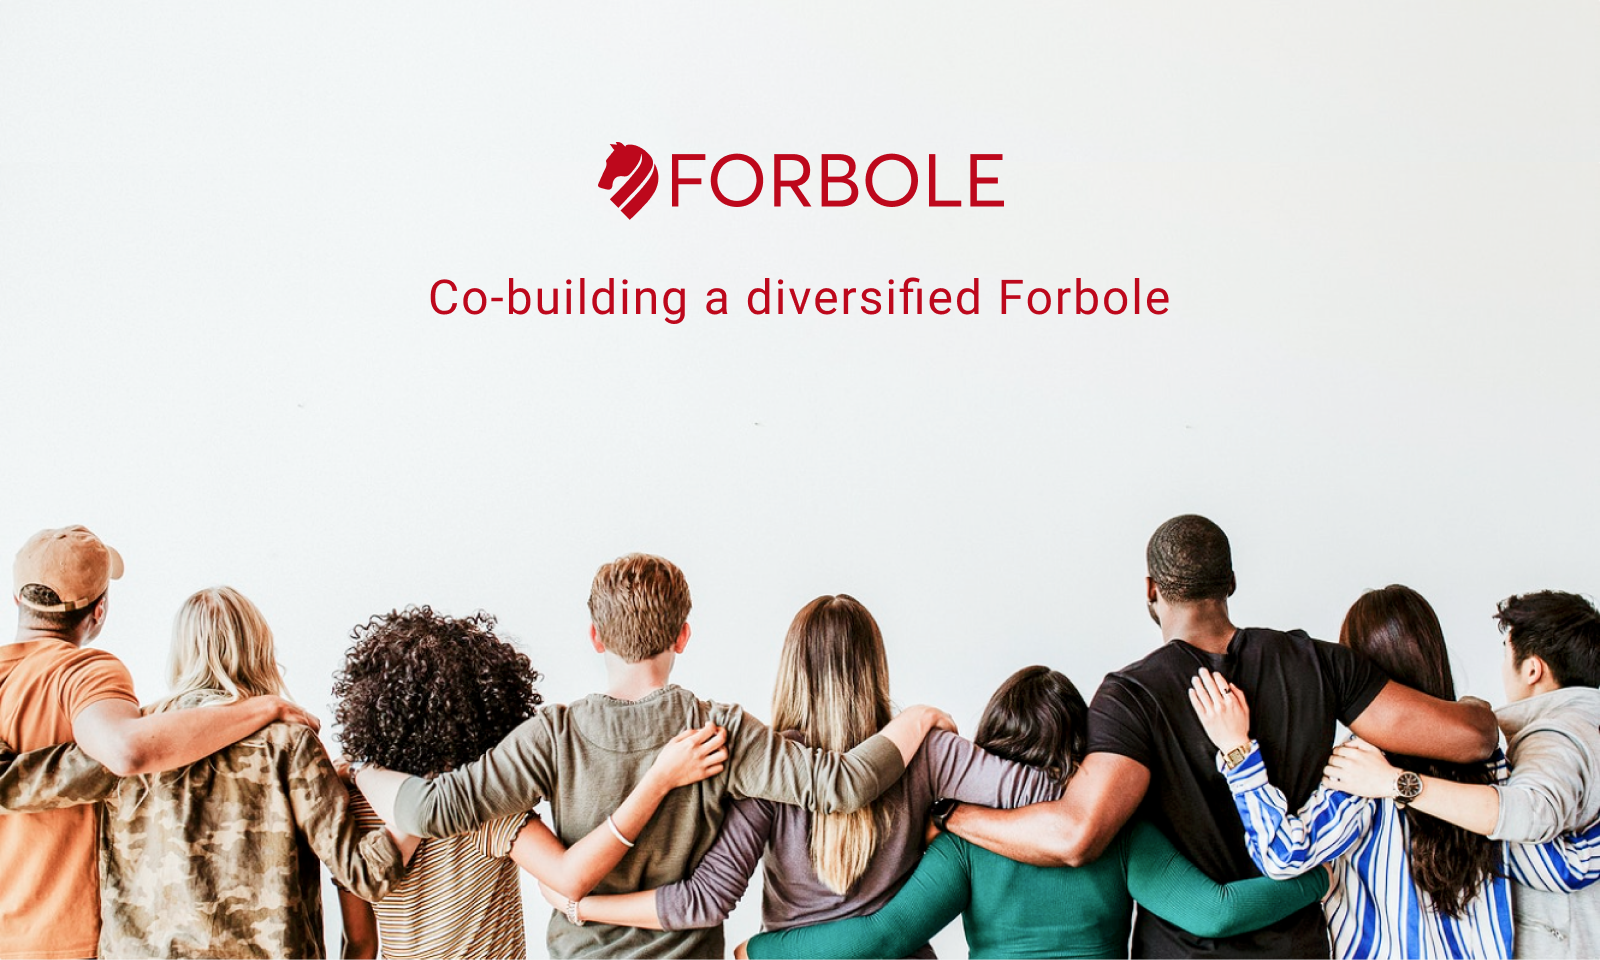 Co-building a diversified Forbole